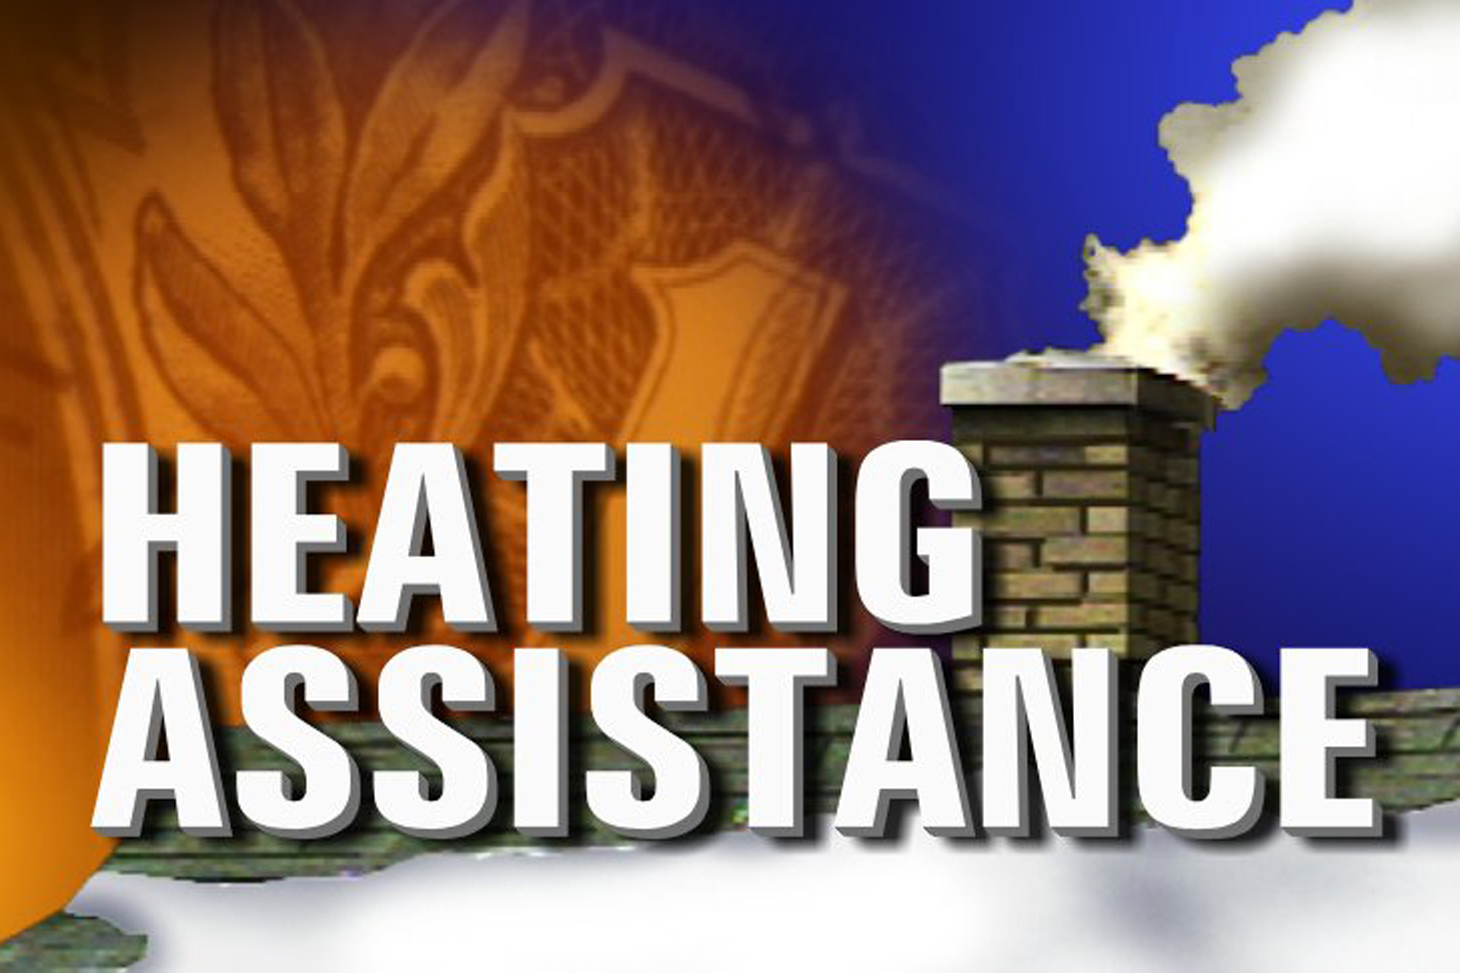 home-heating-assistance-connecticut-house-democrats